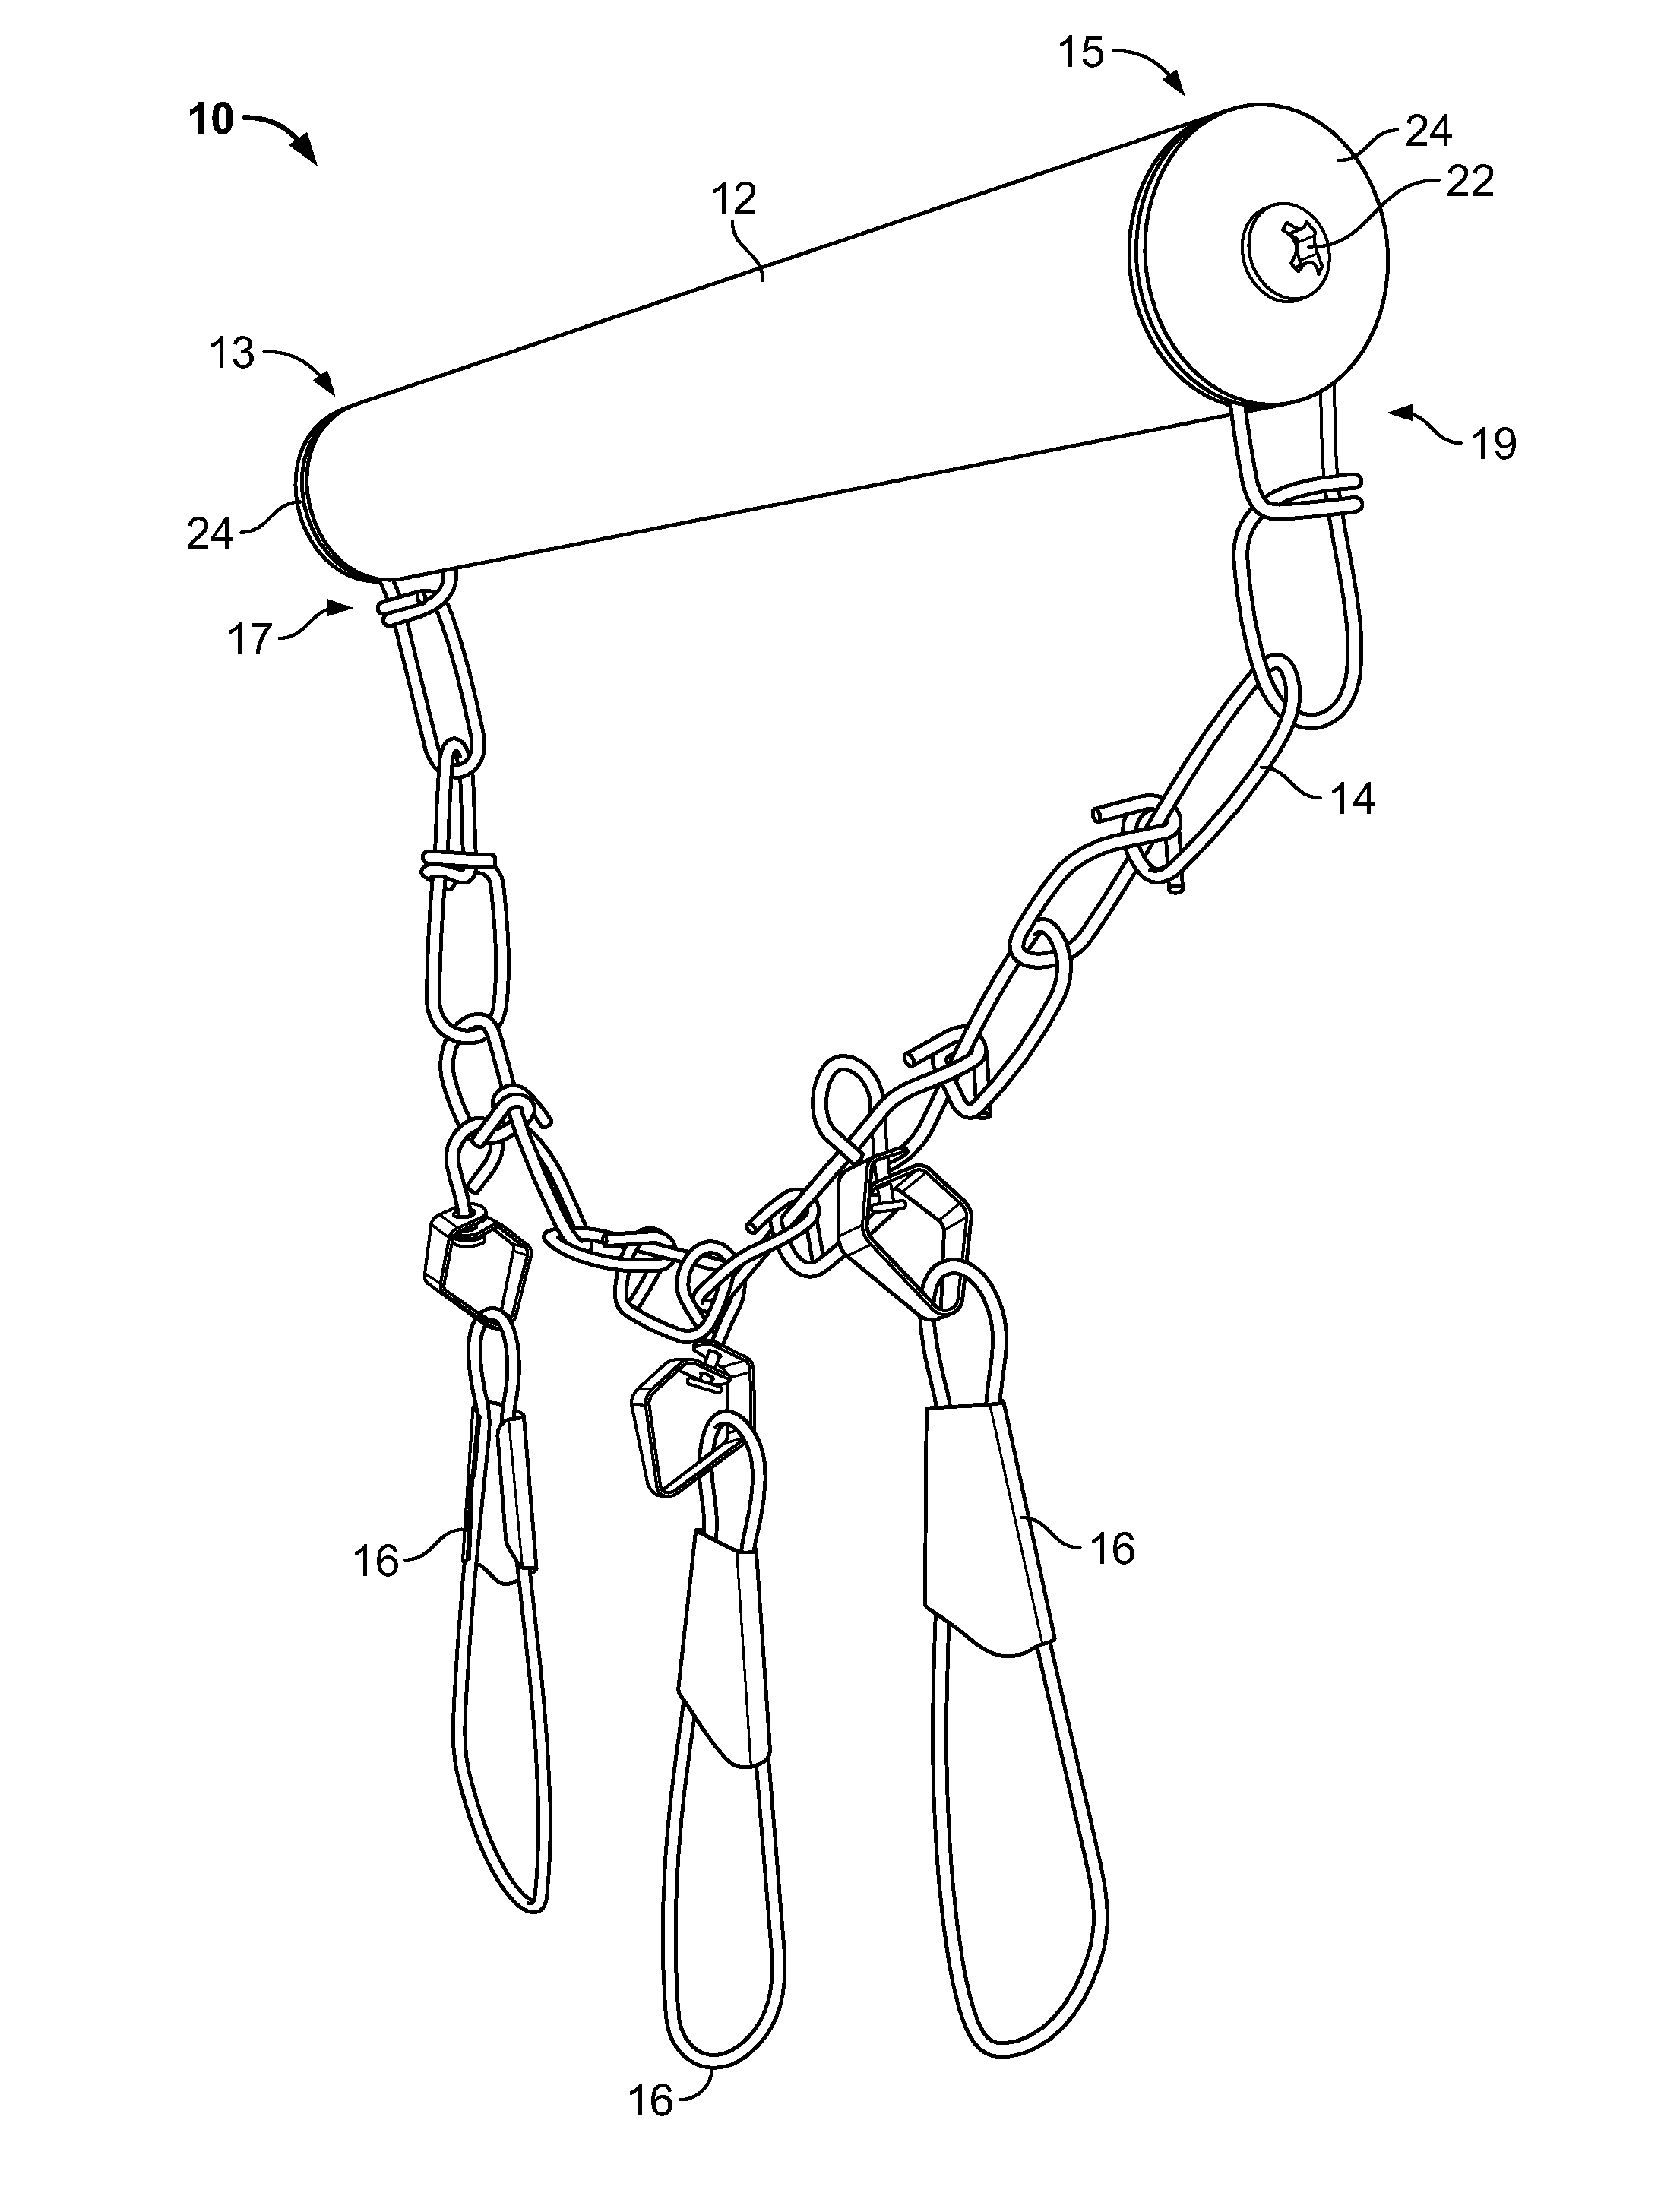 Fish retaining and transporting assemblies and methods of using the same